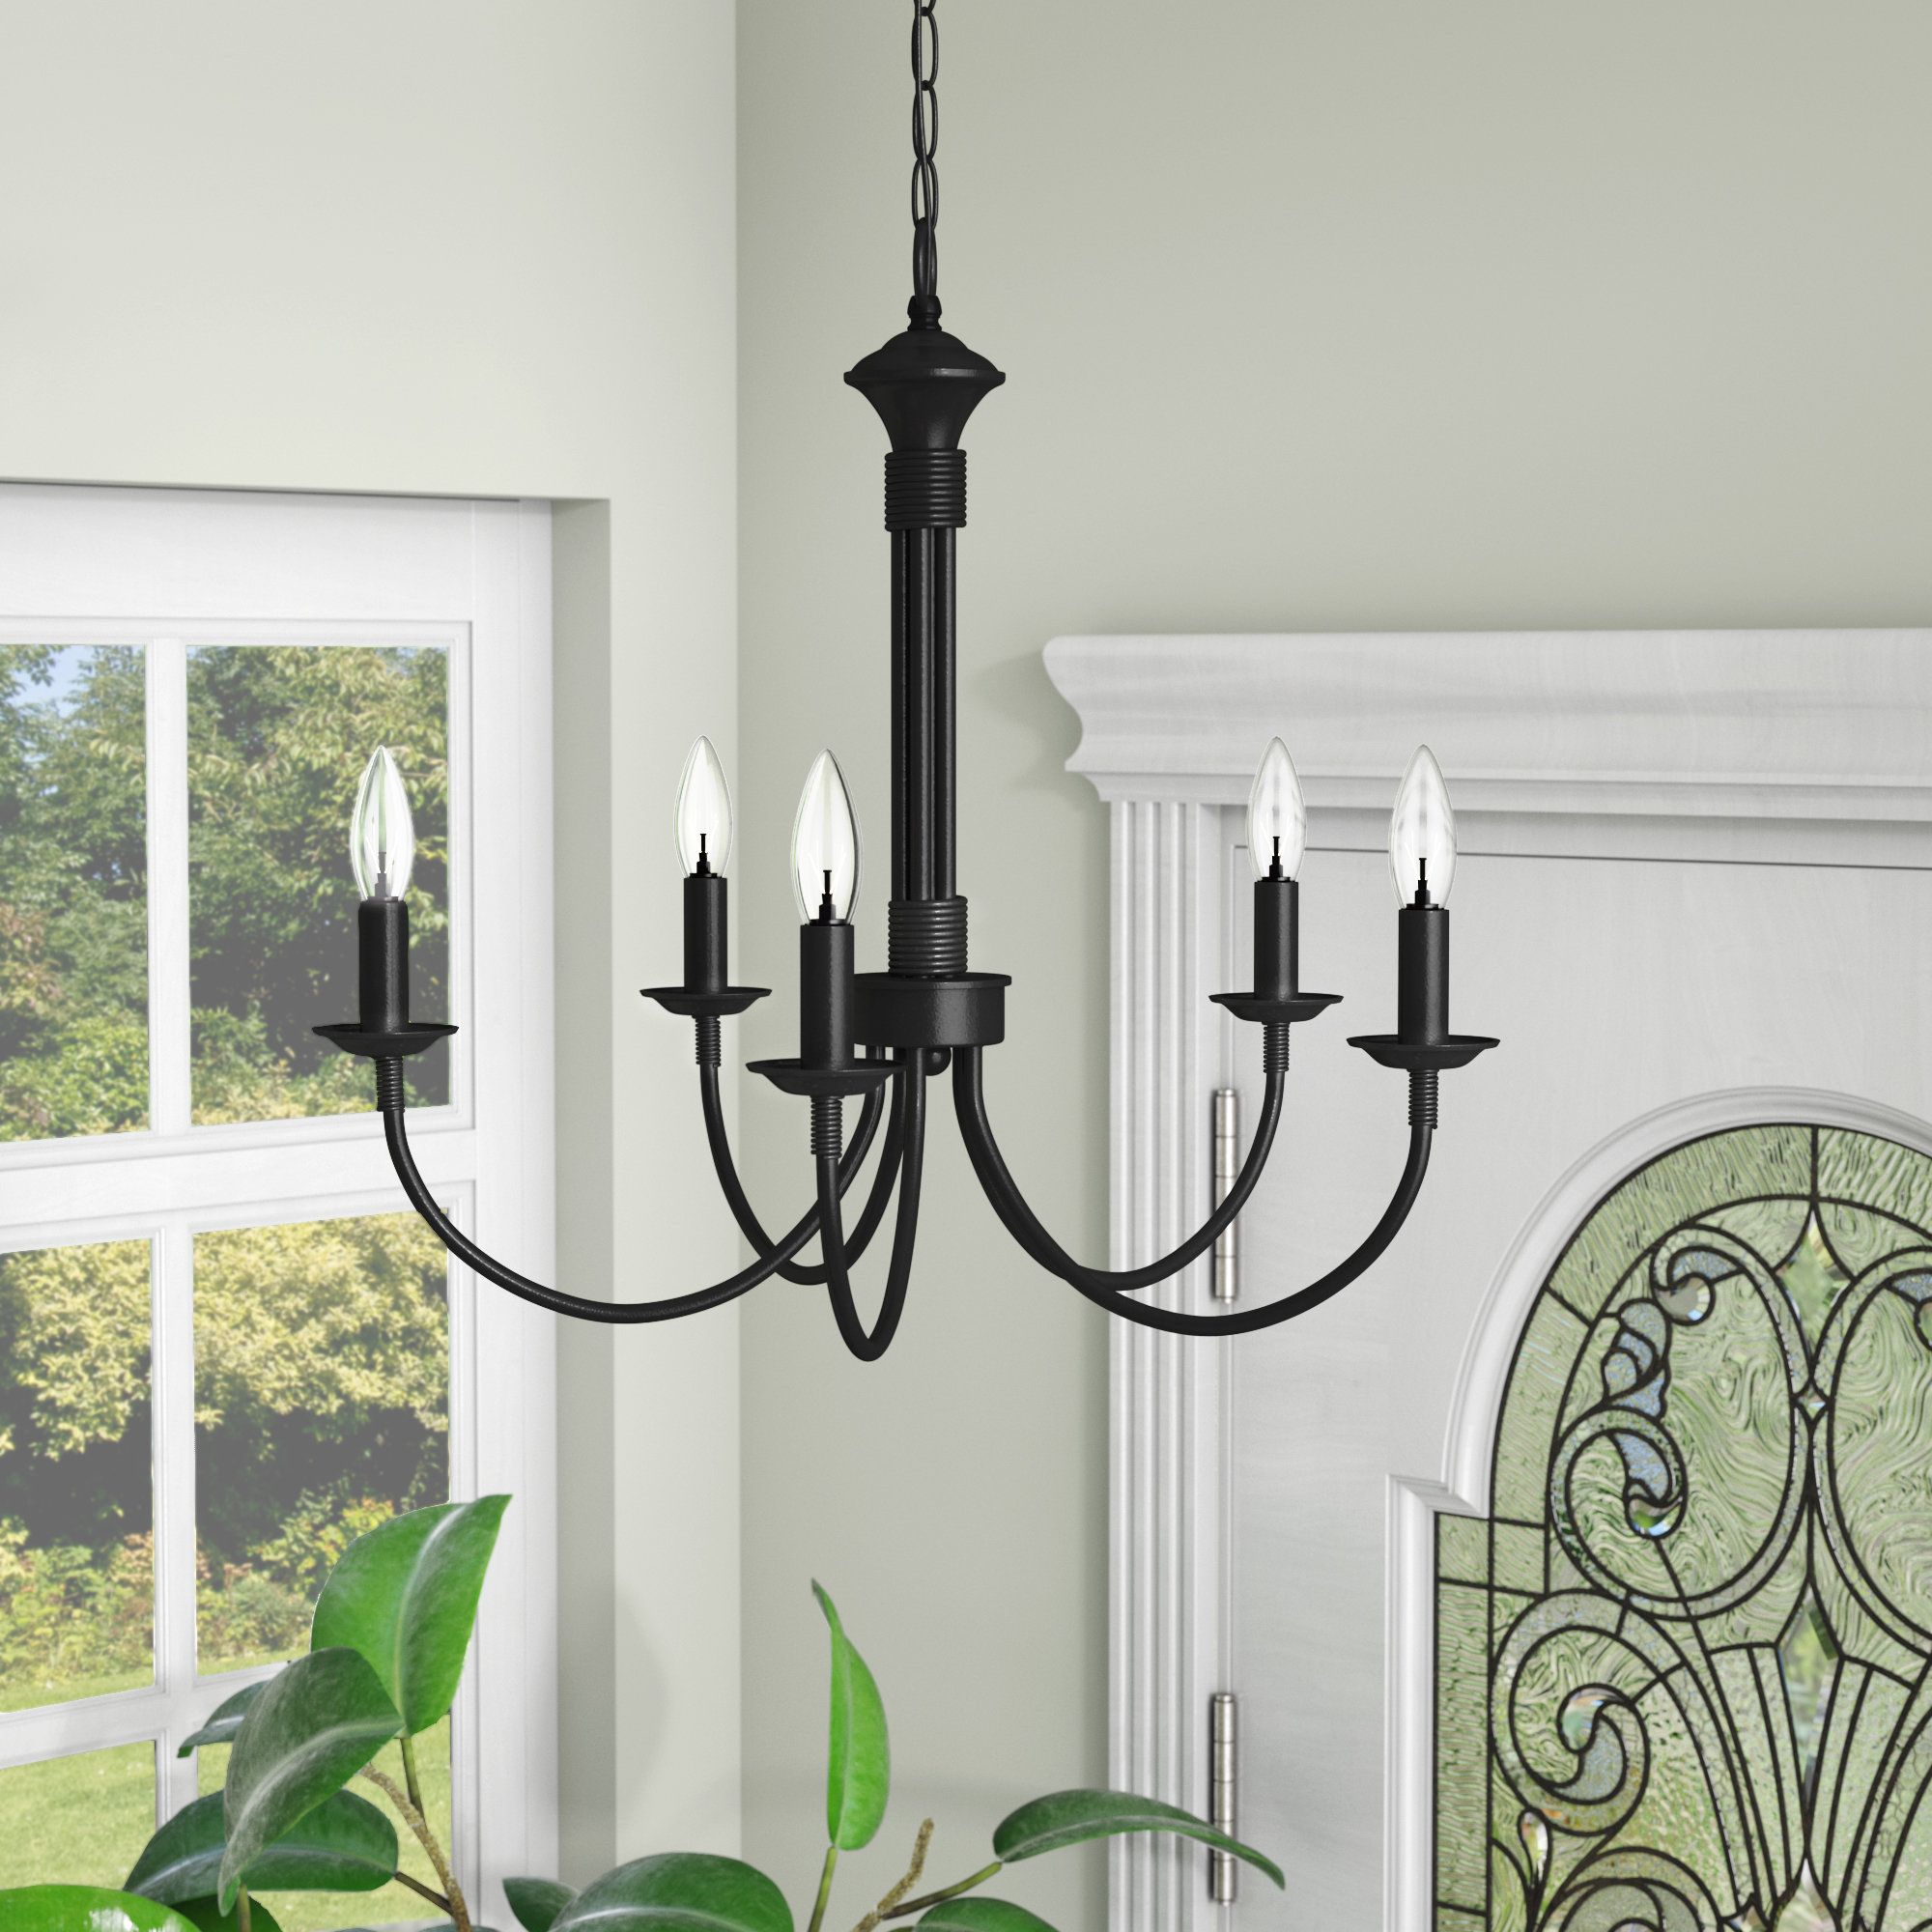 Trendy Shaylee 5 Light Candle Style Chandeliers Pertaining To Shaylee 5 Light Candle Style Chandelier (View 1 of 25)